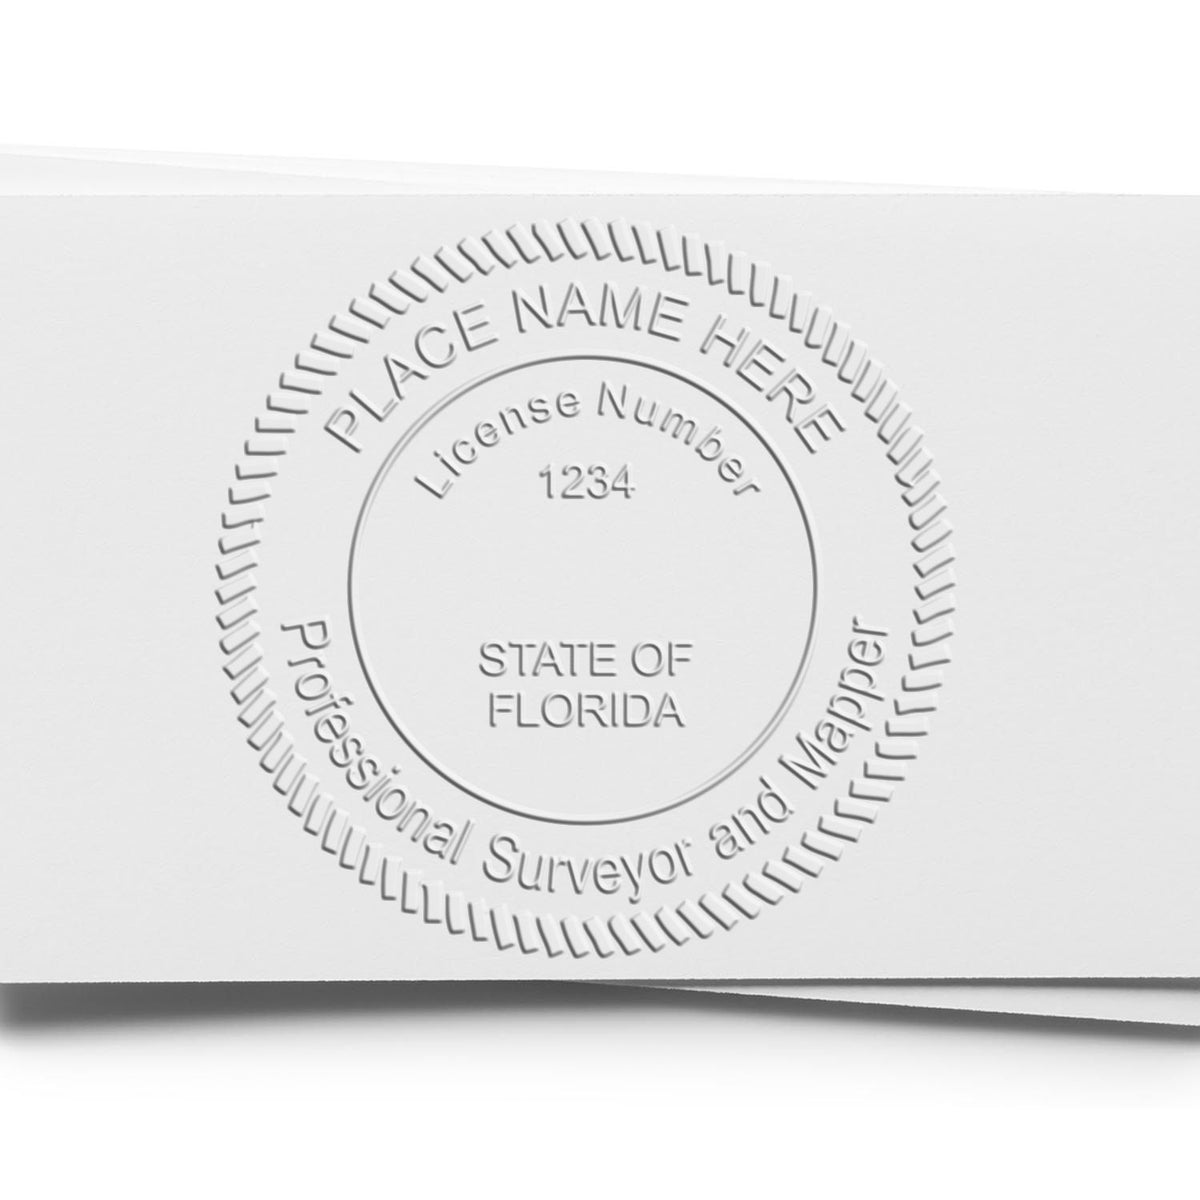 The Gift Florida Land Surveyor Seal stamp impression comes to life with a crisp, detailed image stamped on paper - showcasing true professional quality.